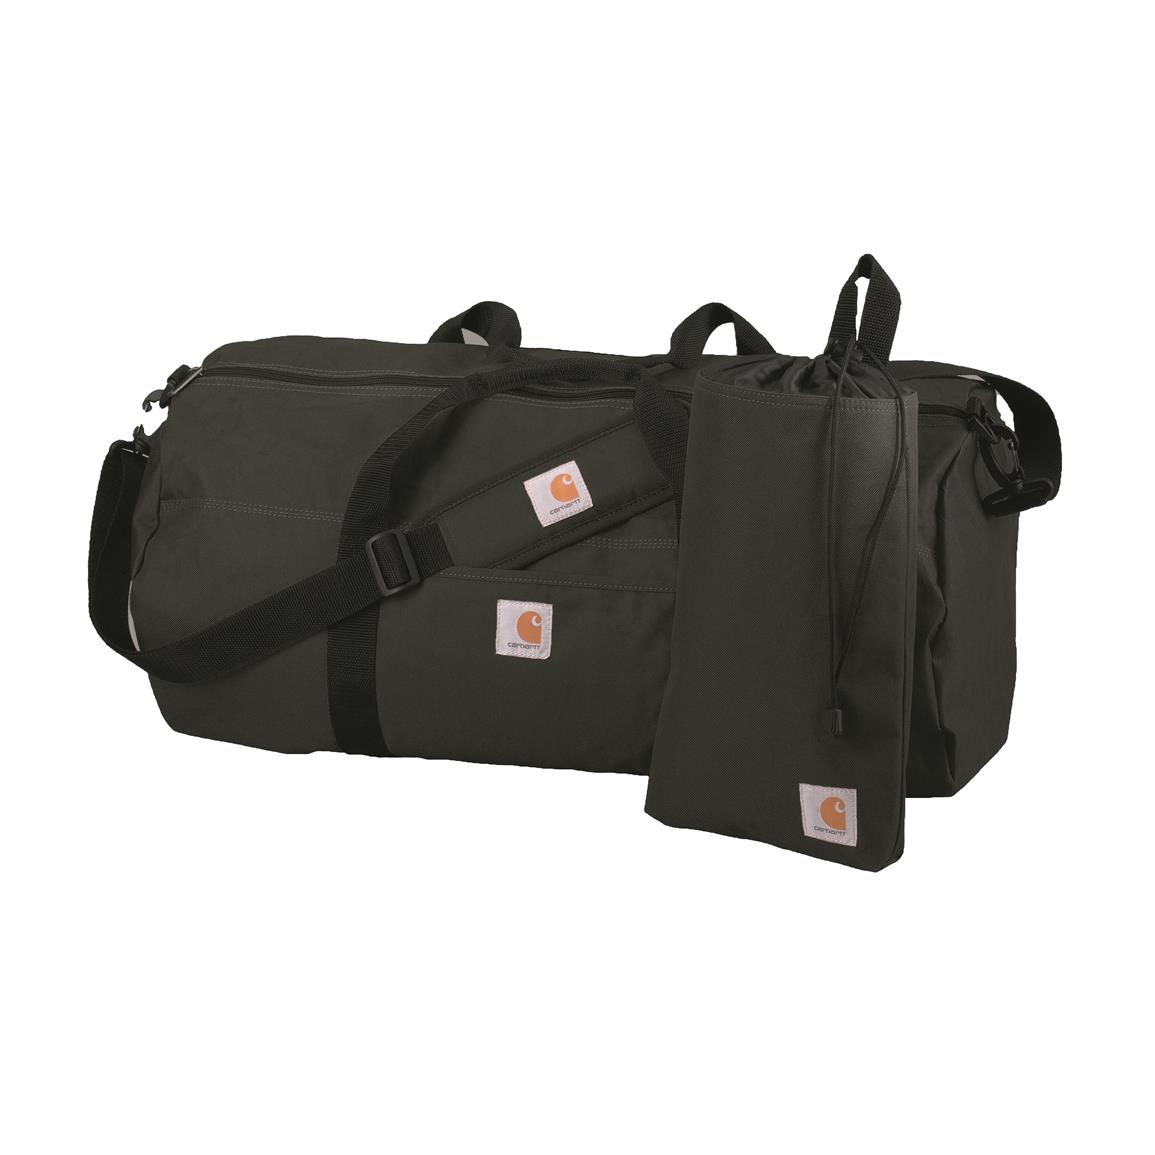 Guide Gear Dry Bag Backpack 60 Liter 581923 Gear And Duffel Bags At Sportsmans Guide 